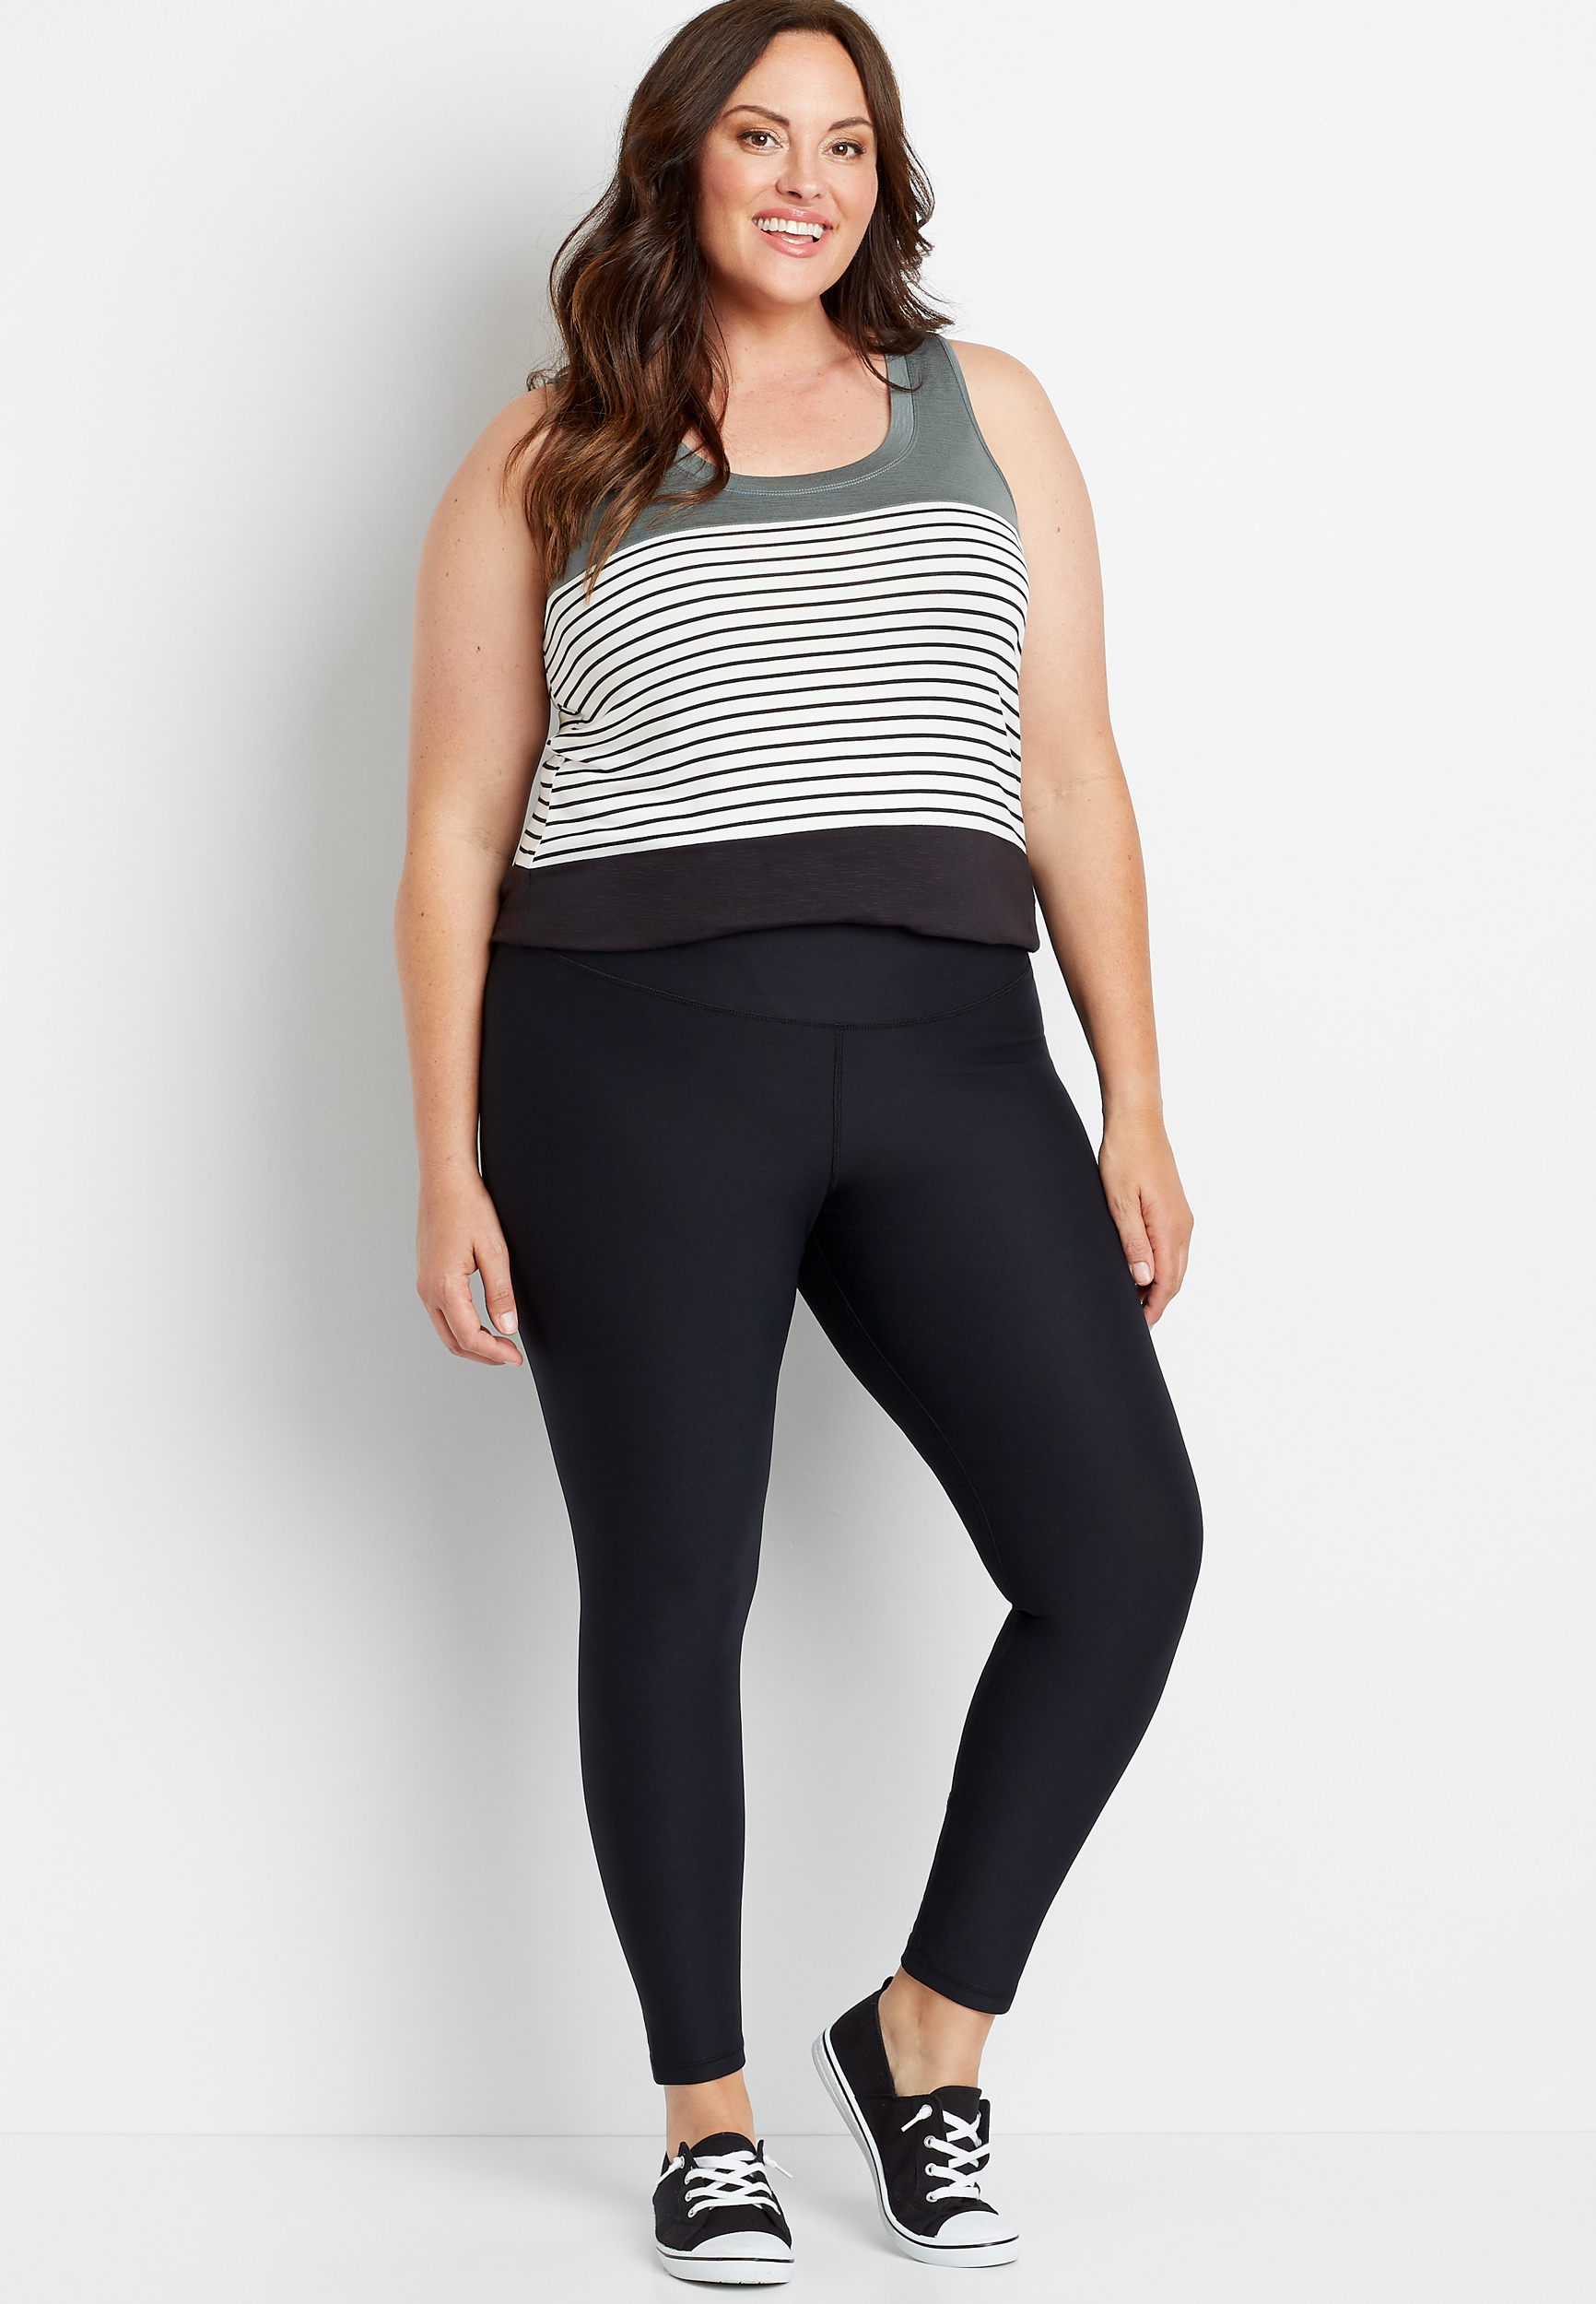 maurices inMOTION Leggings with techtile™ Performance Fabric